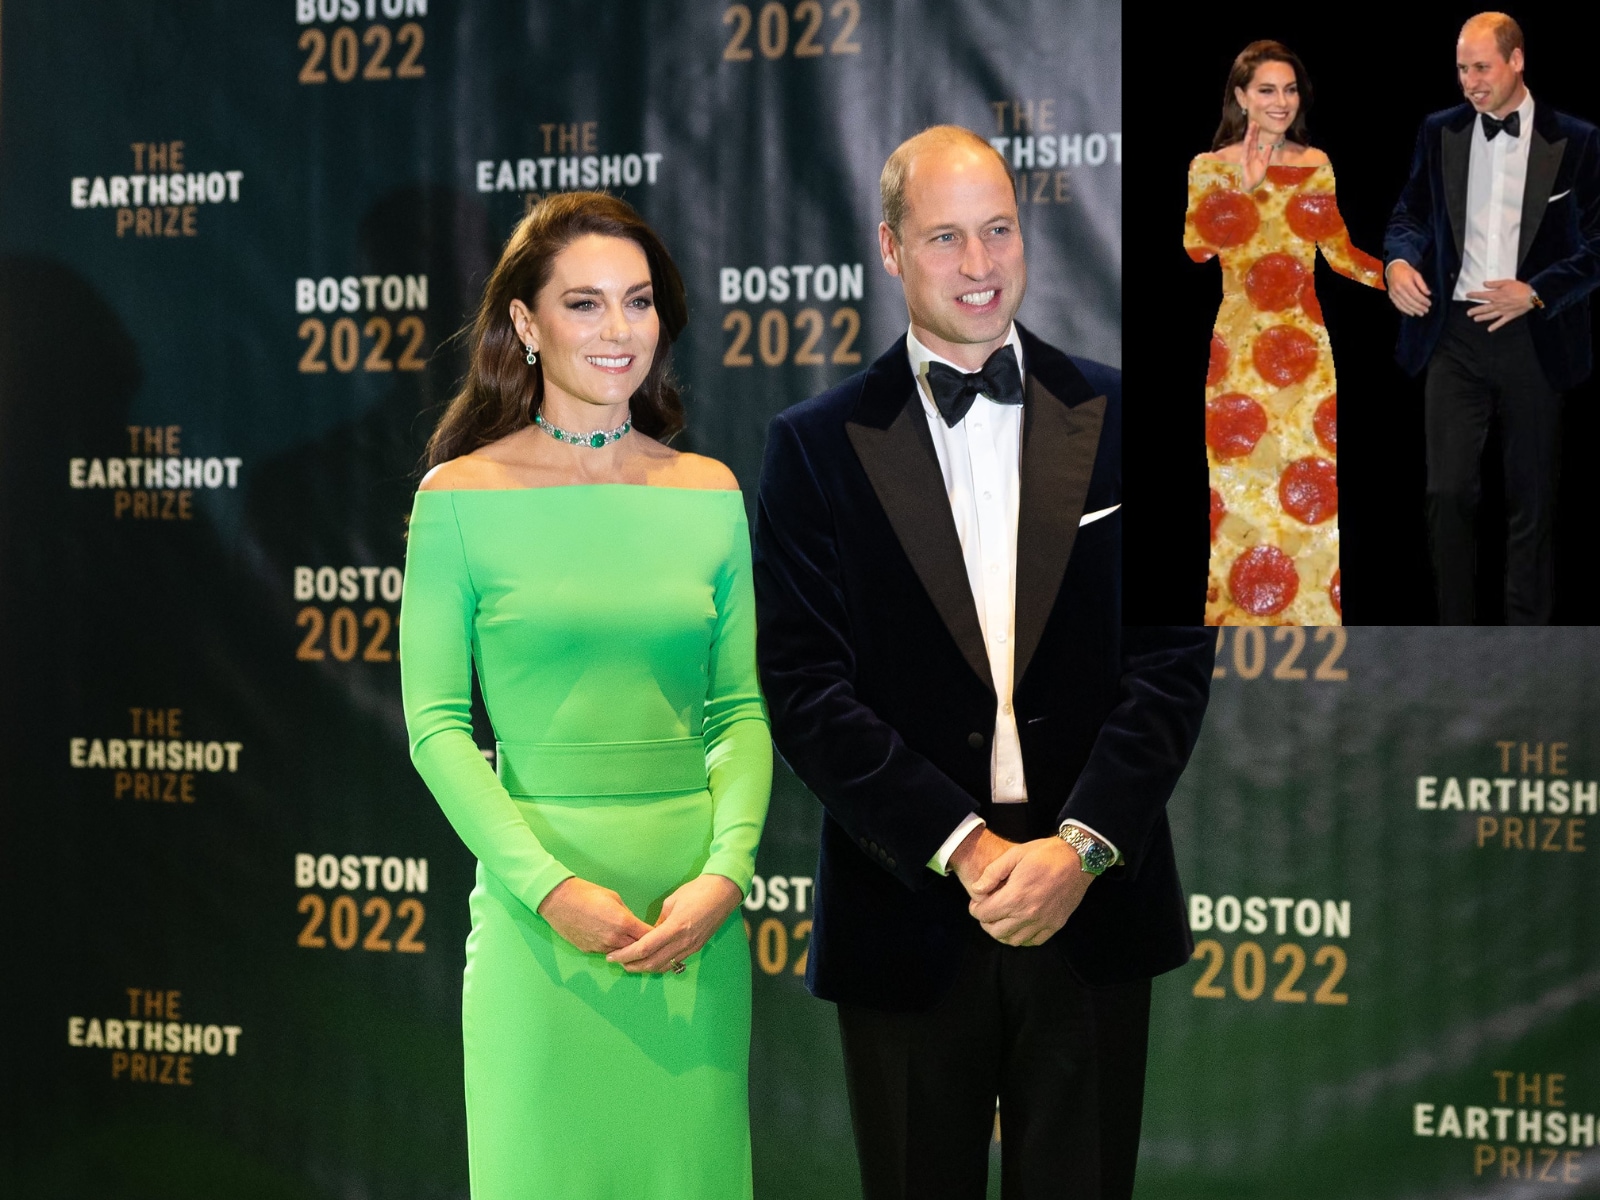 Kate Middleton Boston Outfits Photos: See Pictures of Kate's Style